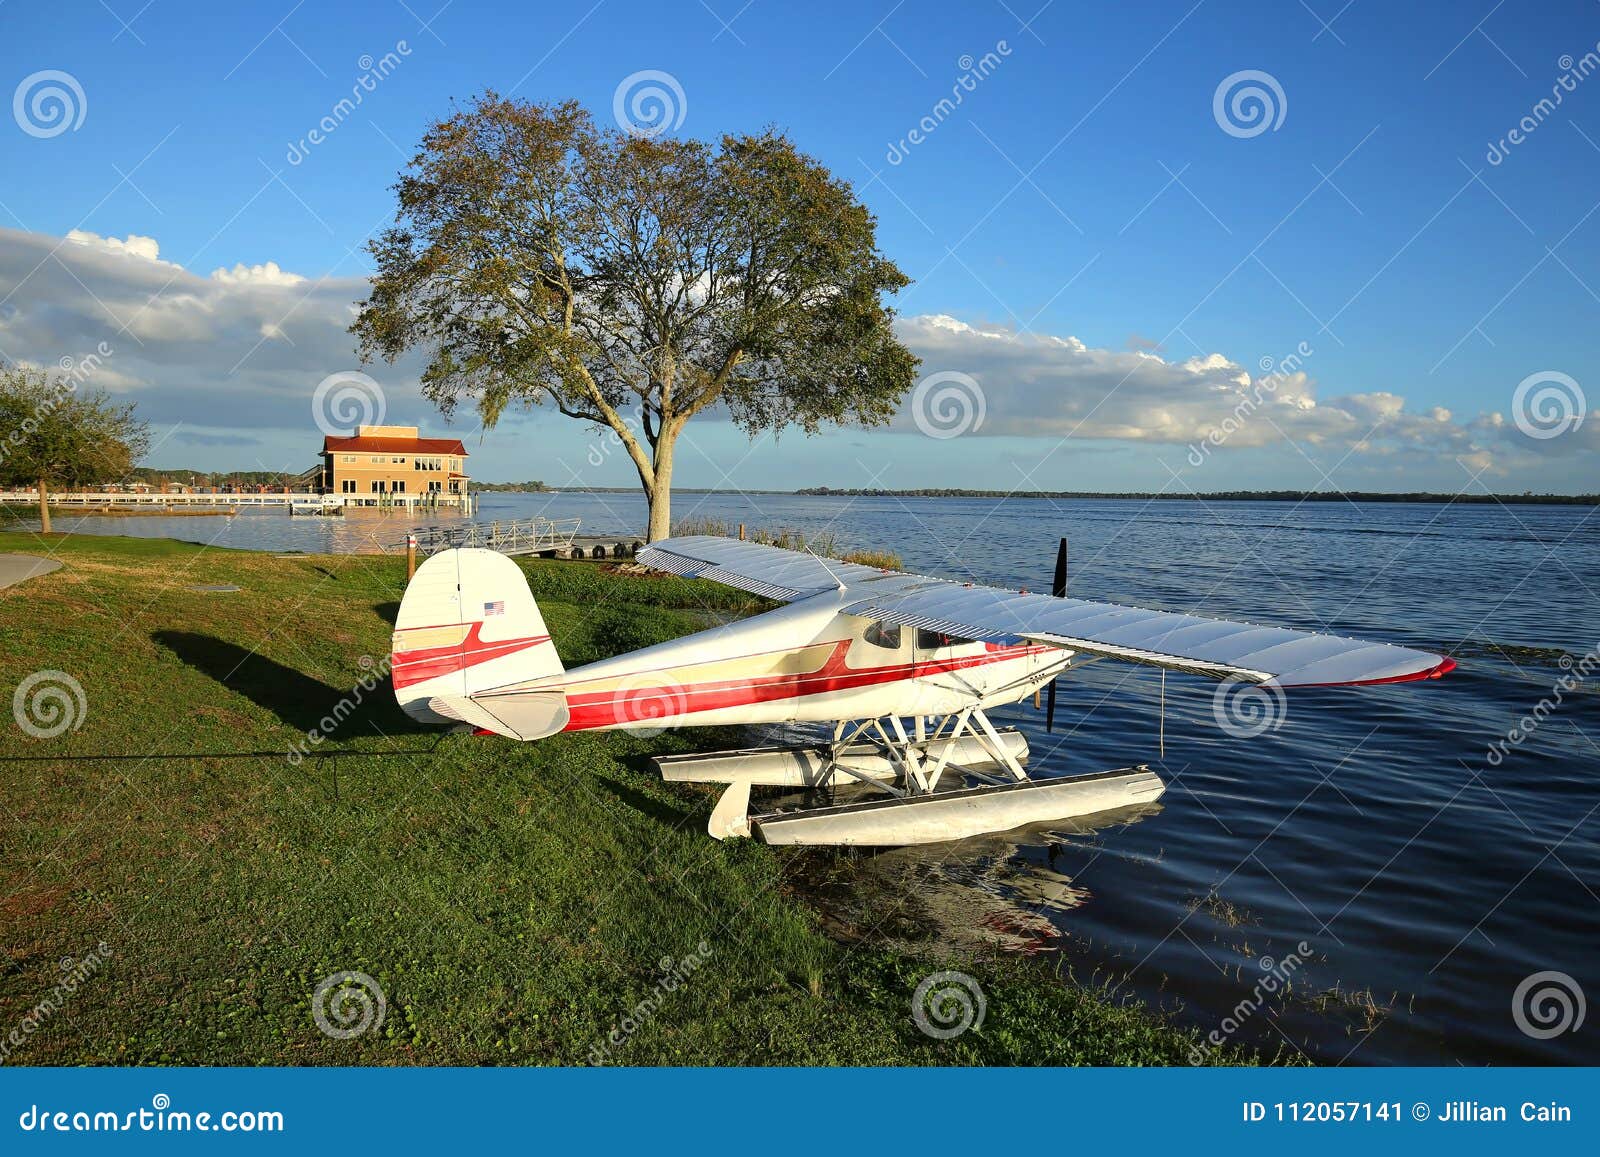 seaplane at the water`s edge in tavares, florida.